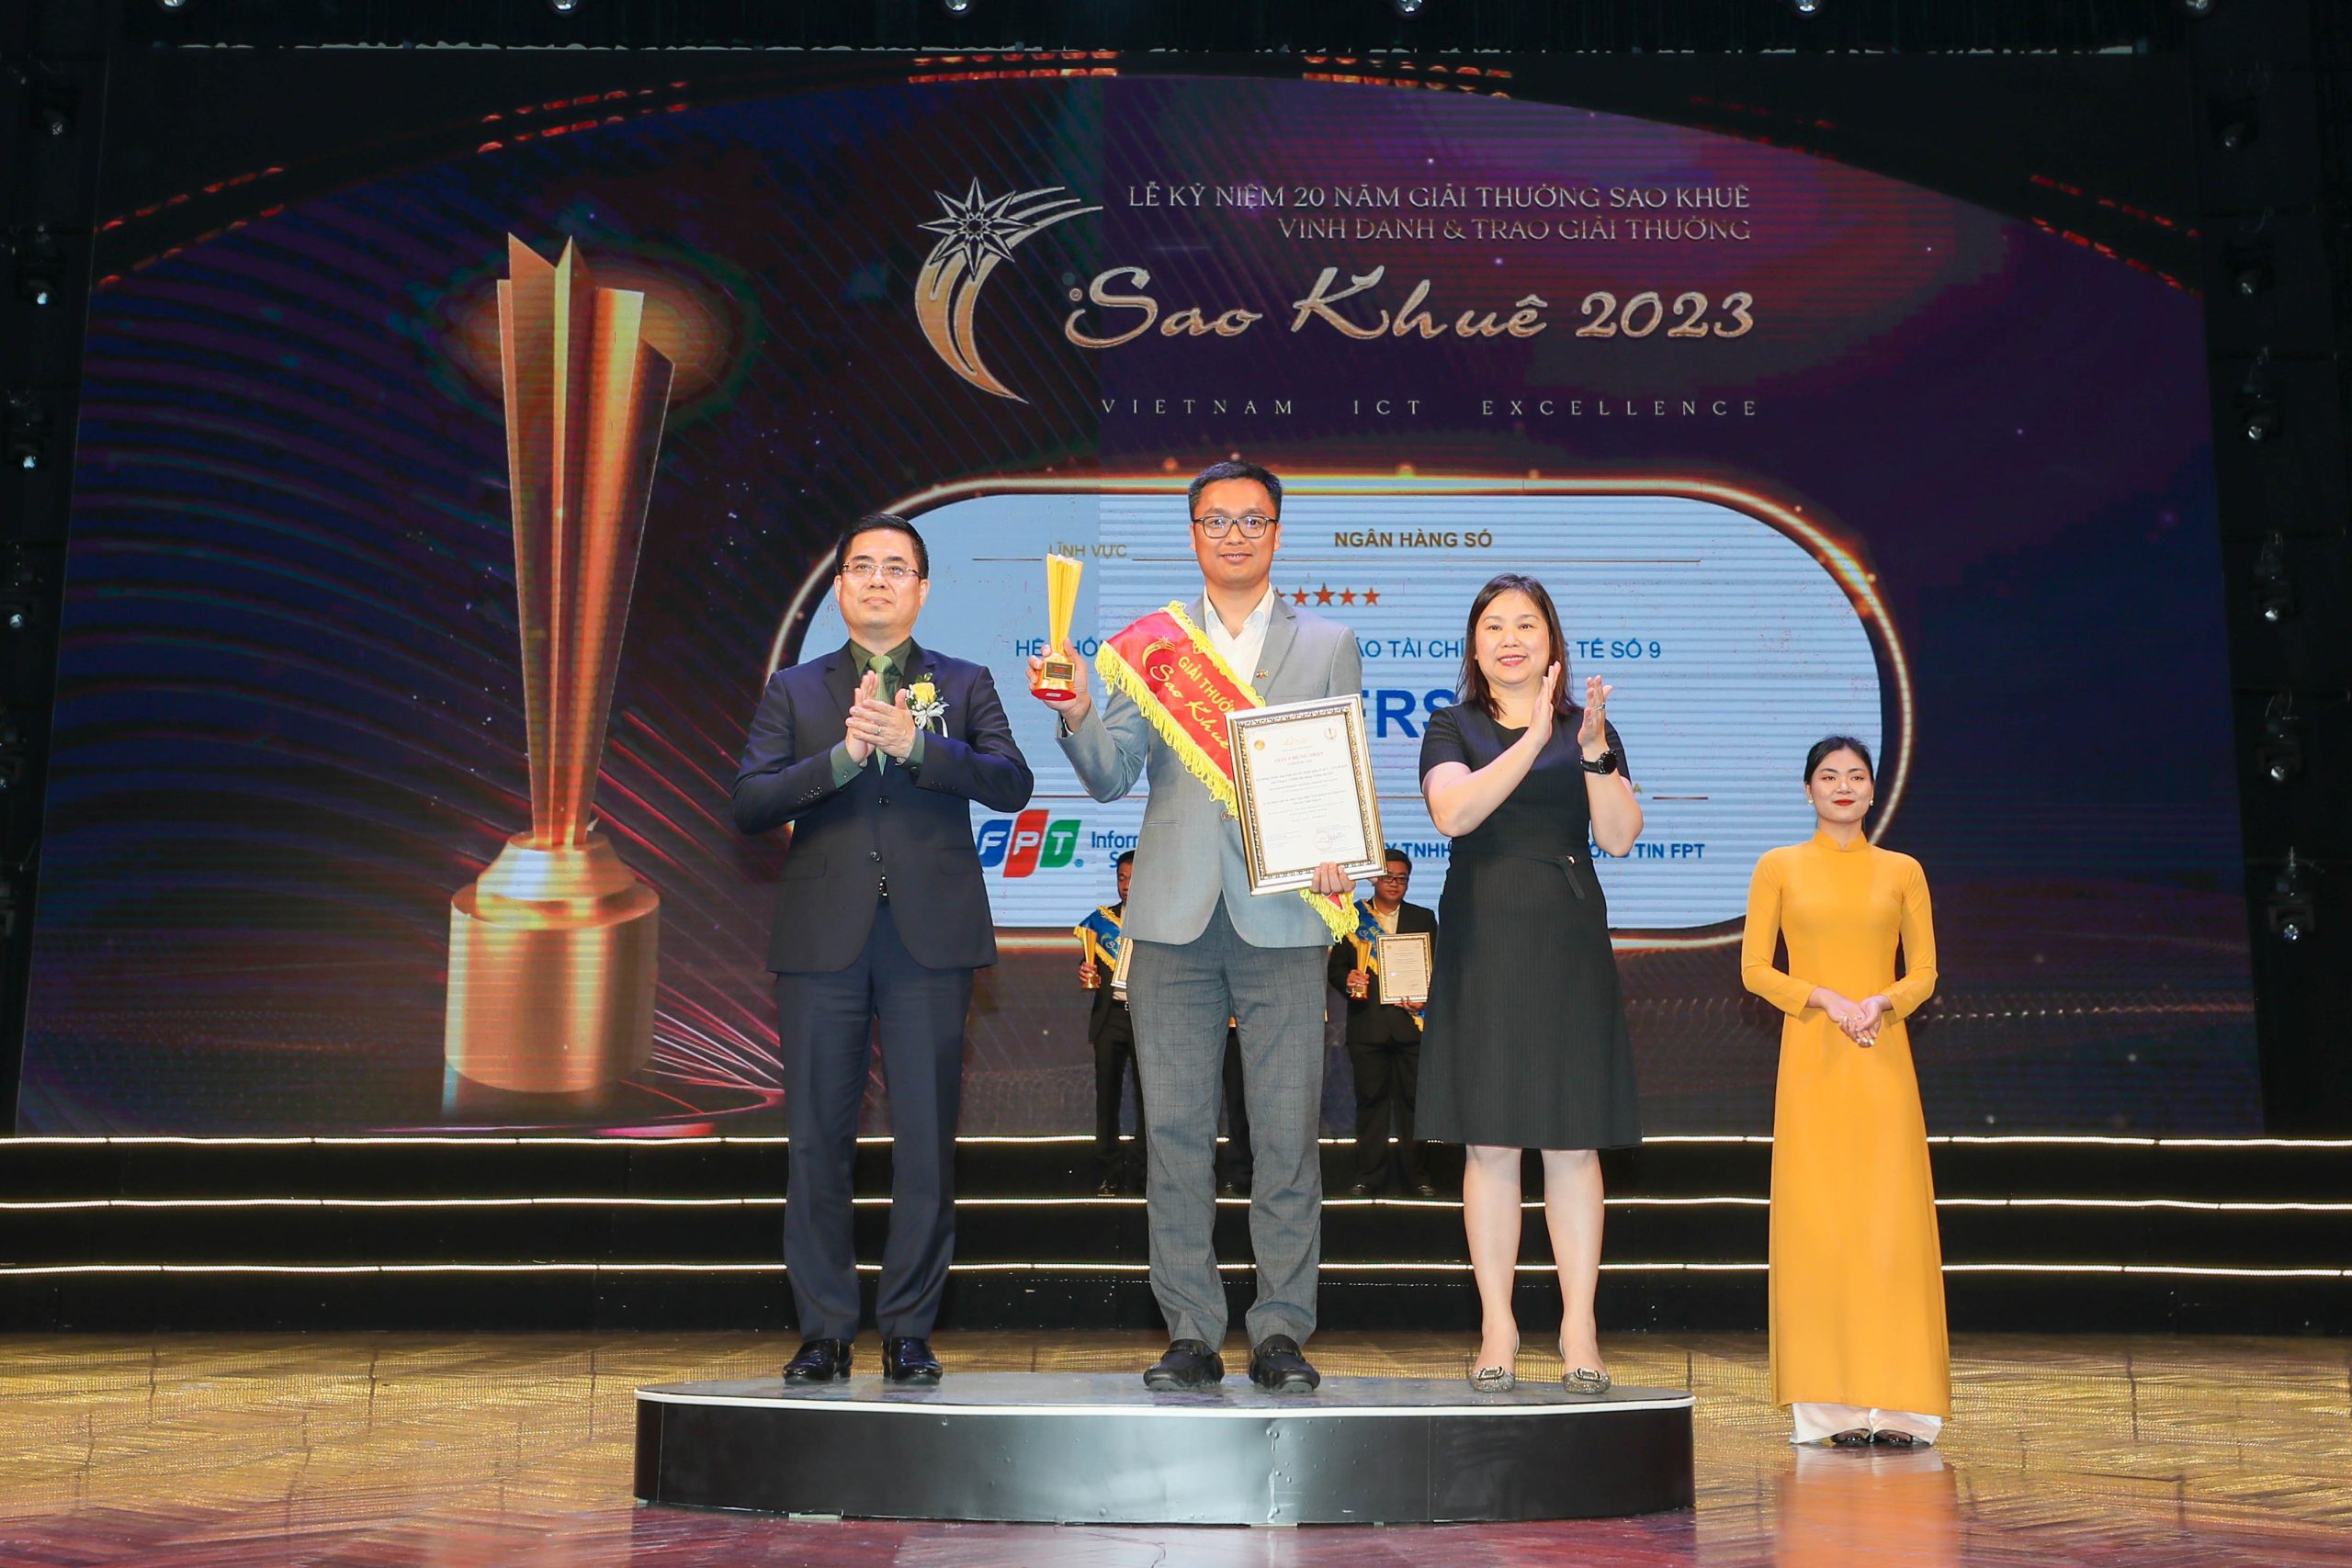 2023 Sao Khue Awards (Vietnam ICT Excellence) – 5-star – International Financial Reporting Standards 9 System (FPT.IFRS9)